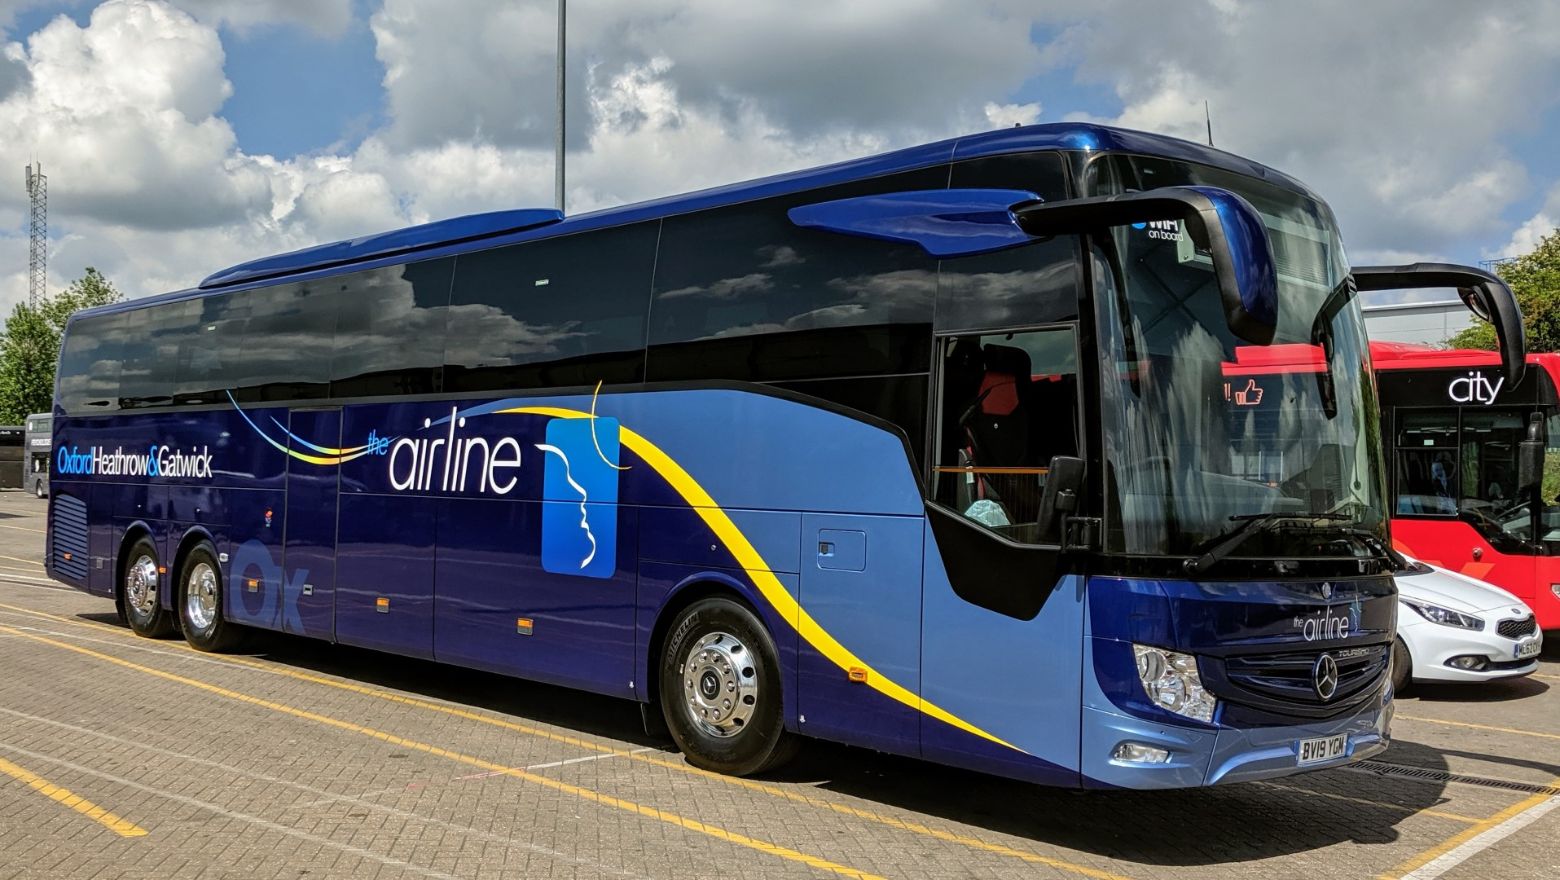 Airline coach service to increase frequency